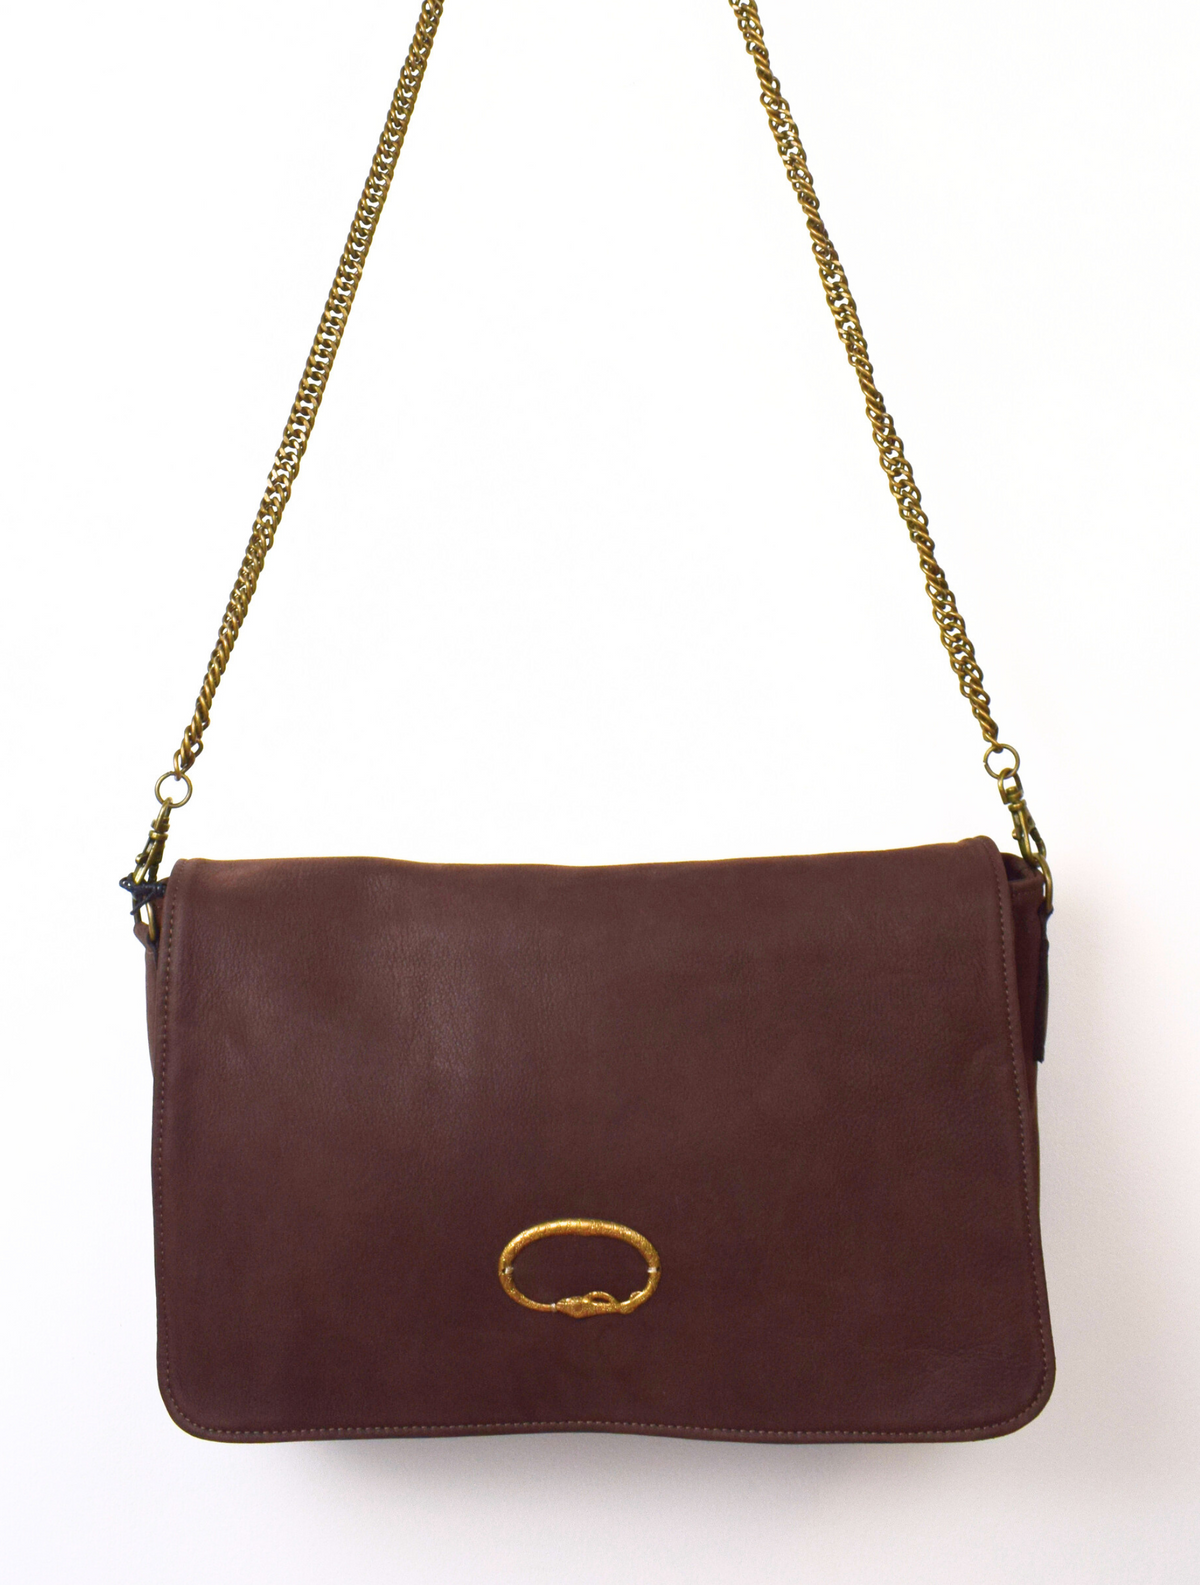 Brown nubuck leather bag with brass cobra stomp and removable chain strap